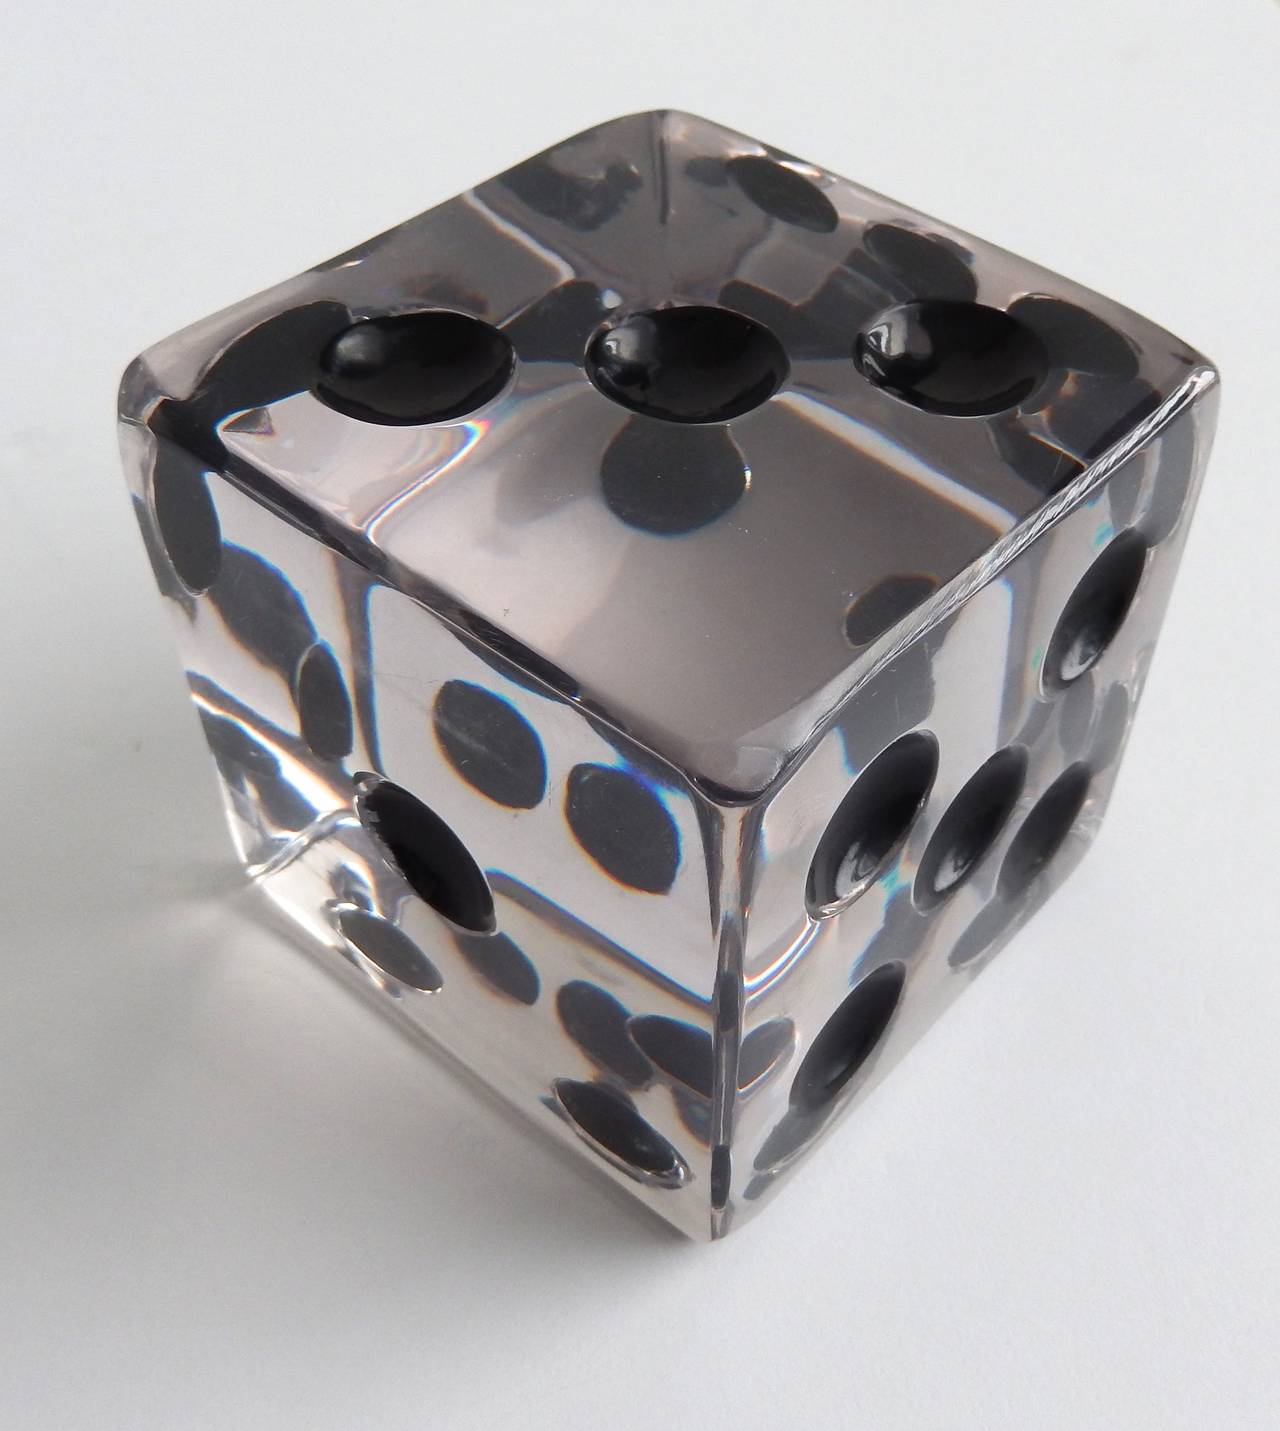 Enameled 1960s Oversized Acrylic Dice Paperweight